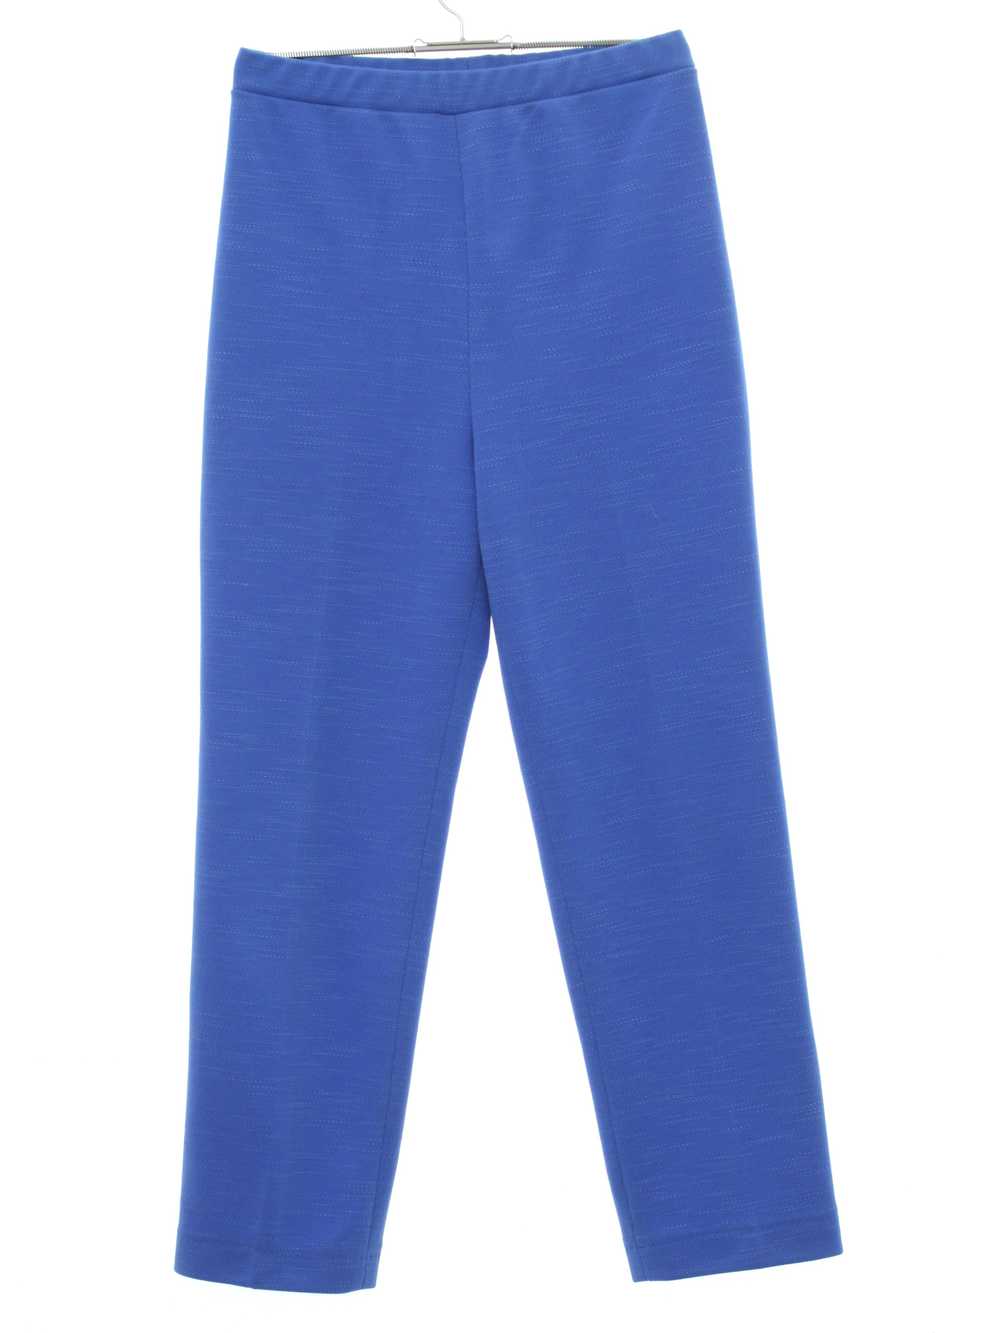 1970's Womens Tapered Knit Pants - image 1